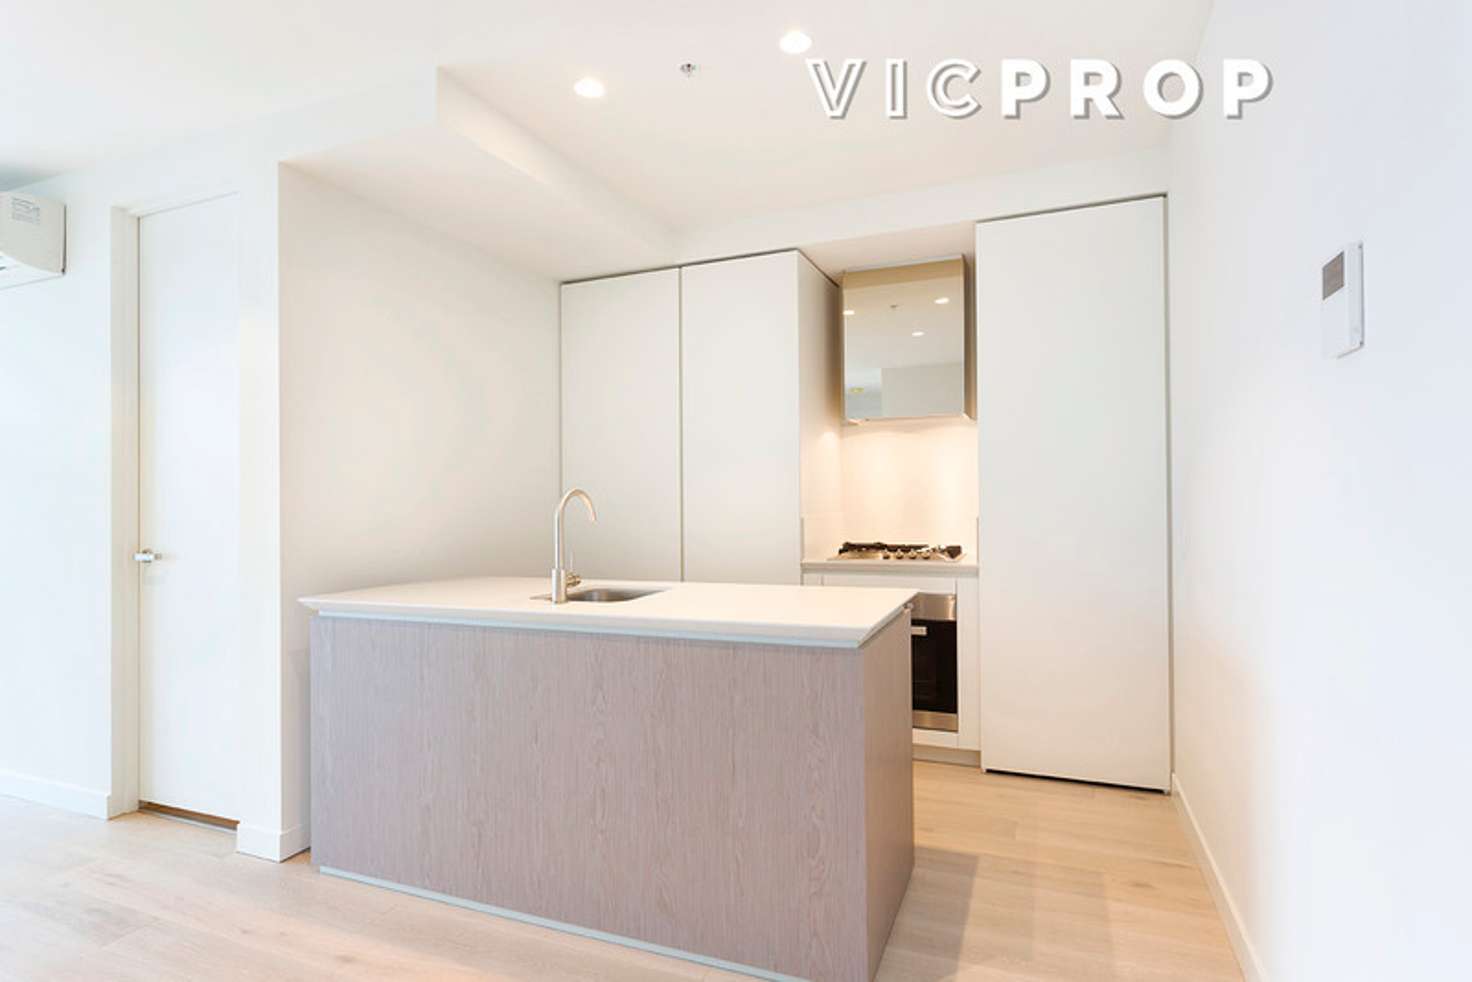 Main view of Homely apartment listing, 3602/127-141 A'Beckett Street, Melbourne VIC 3000